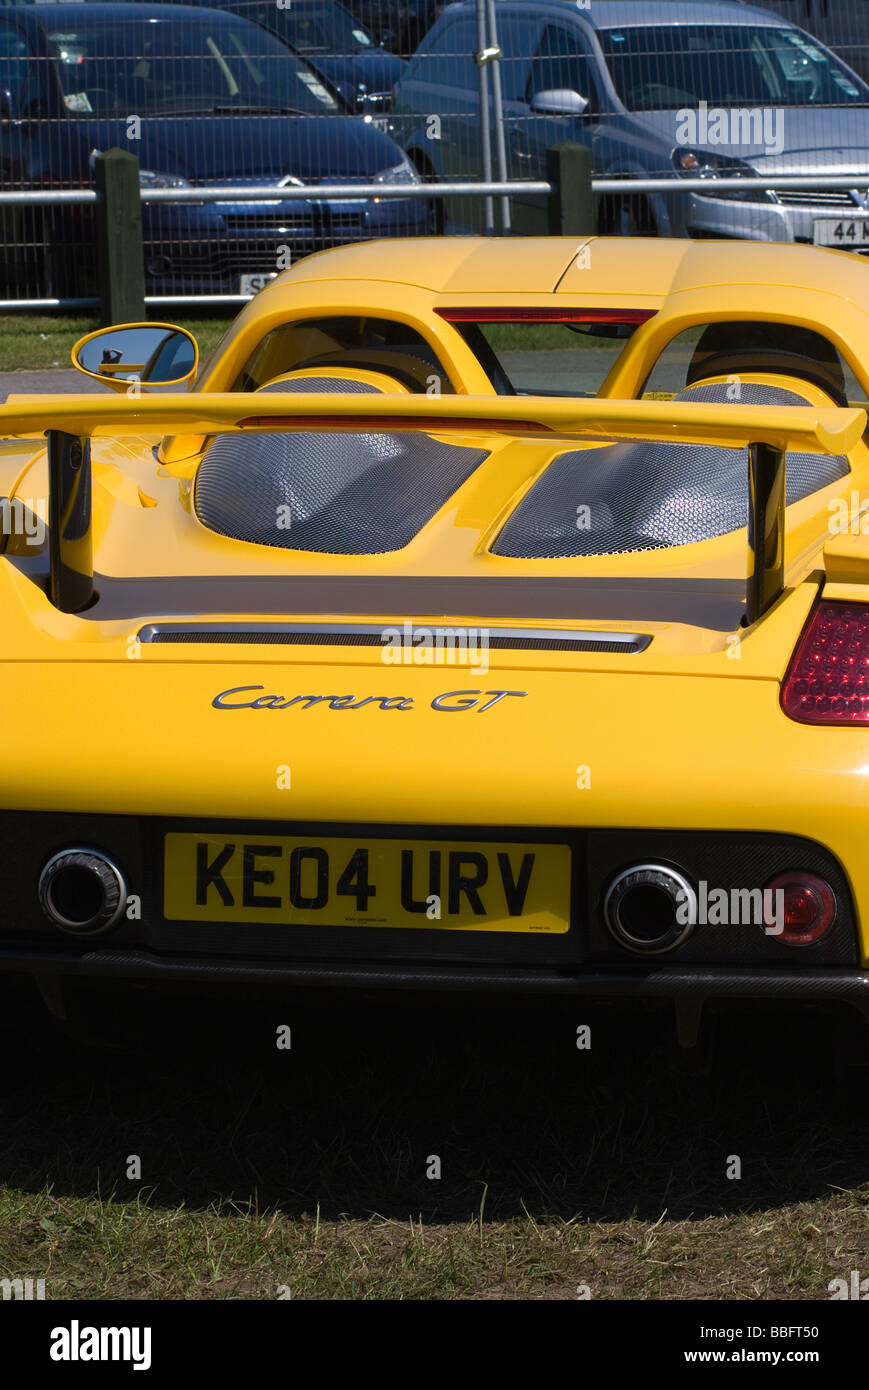 Rear View of a Bright Yellow Porsche Carrera GT Sports Car at Oulton Park  Motor Racing Circuit Cheshire England United Kingdom Stock Photo - Alamy